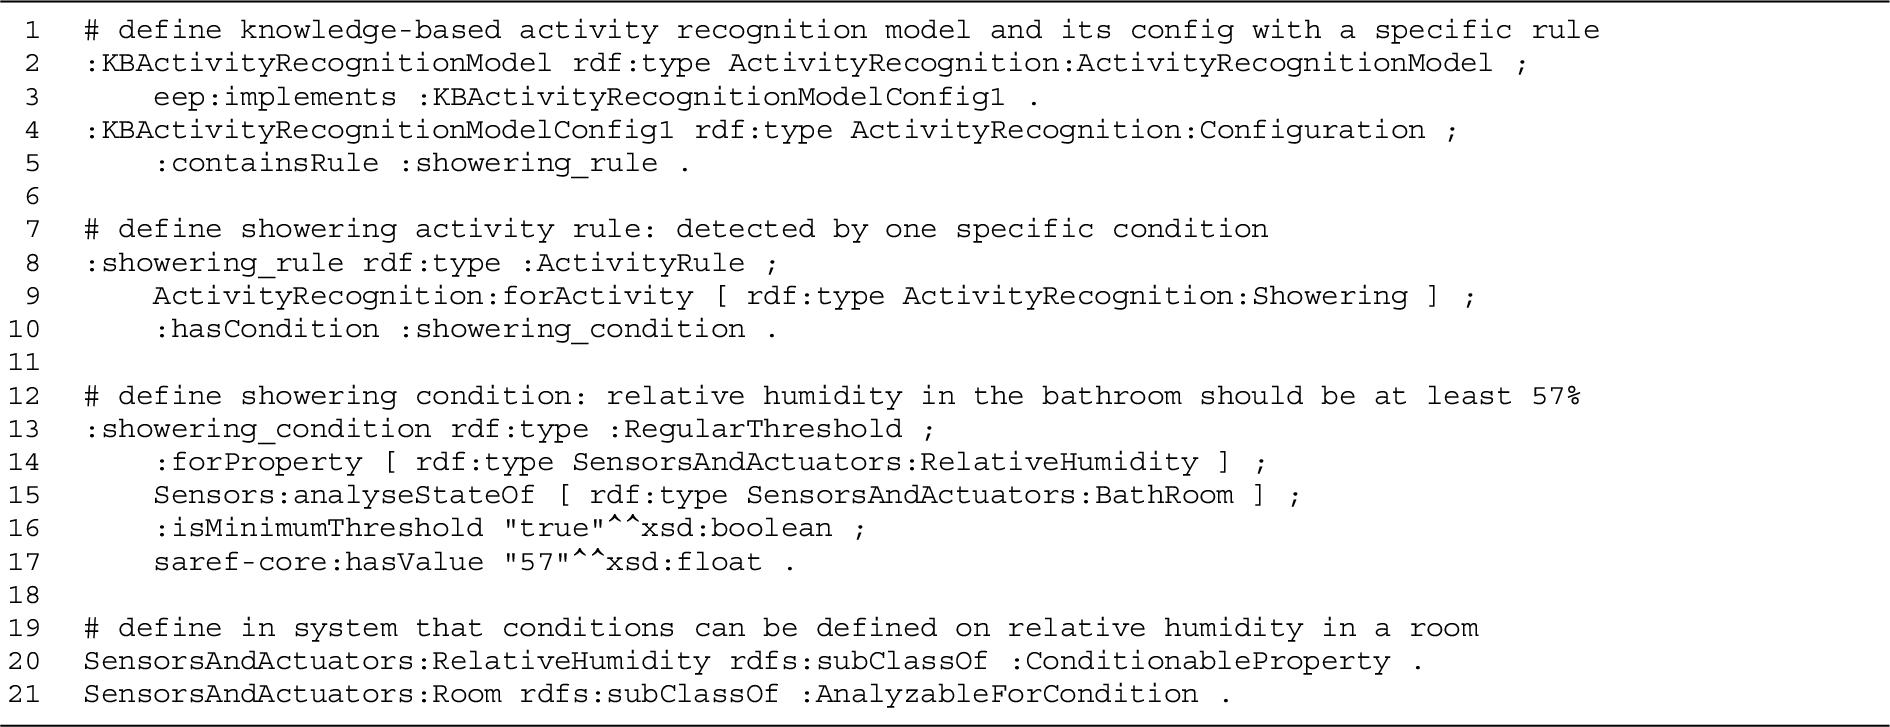 Example of how a knowledge-based AR model with an activity rule for showering can be described through triples in the KBActivityRecognition ontology module. All definitions are listed in RDF/Turtle syntax. To improve readability, the KBActivityRecognition: prefix is replaced by the : prefix.